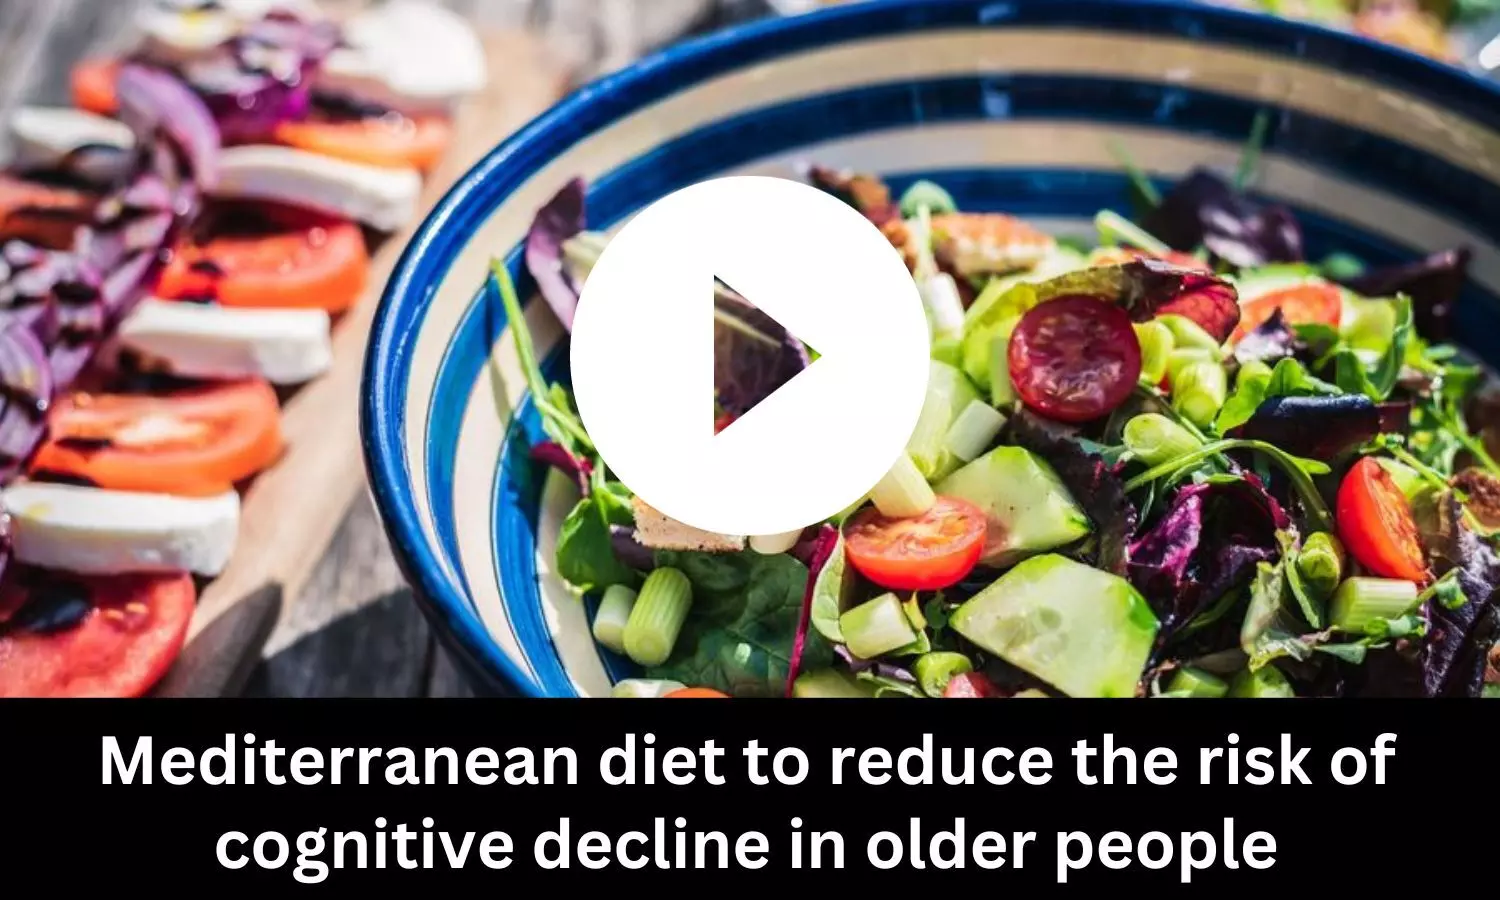 Mediterranean diet to reduce the risk of cognitive decline in older people